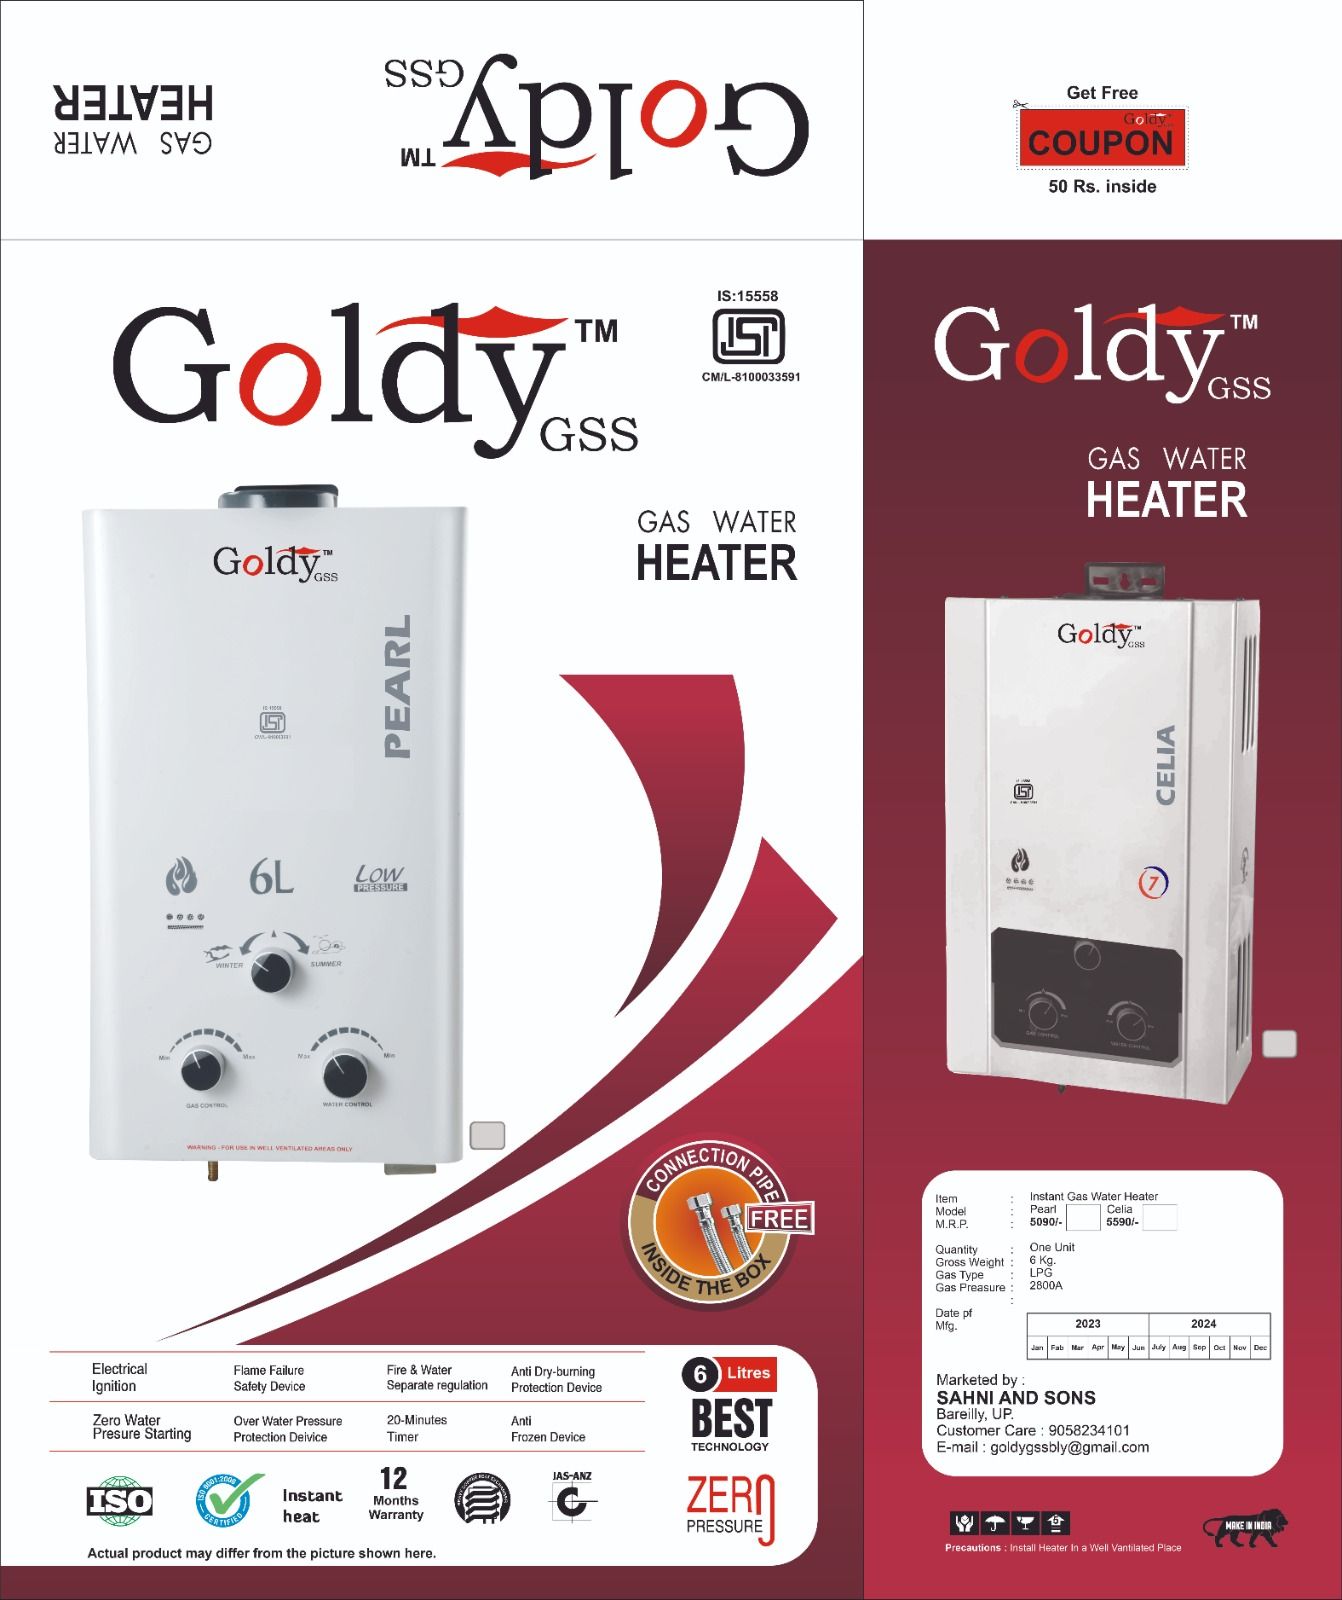 GOLDY PEARL GAS WATER HEATER  6L CAPACITY